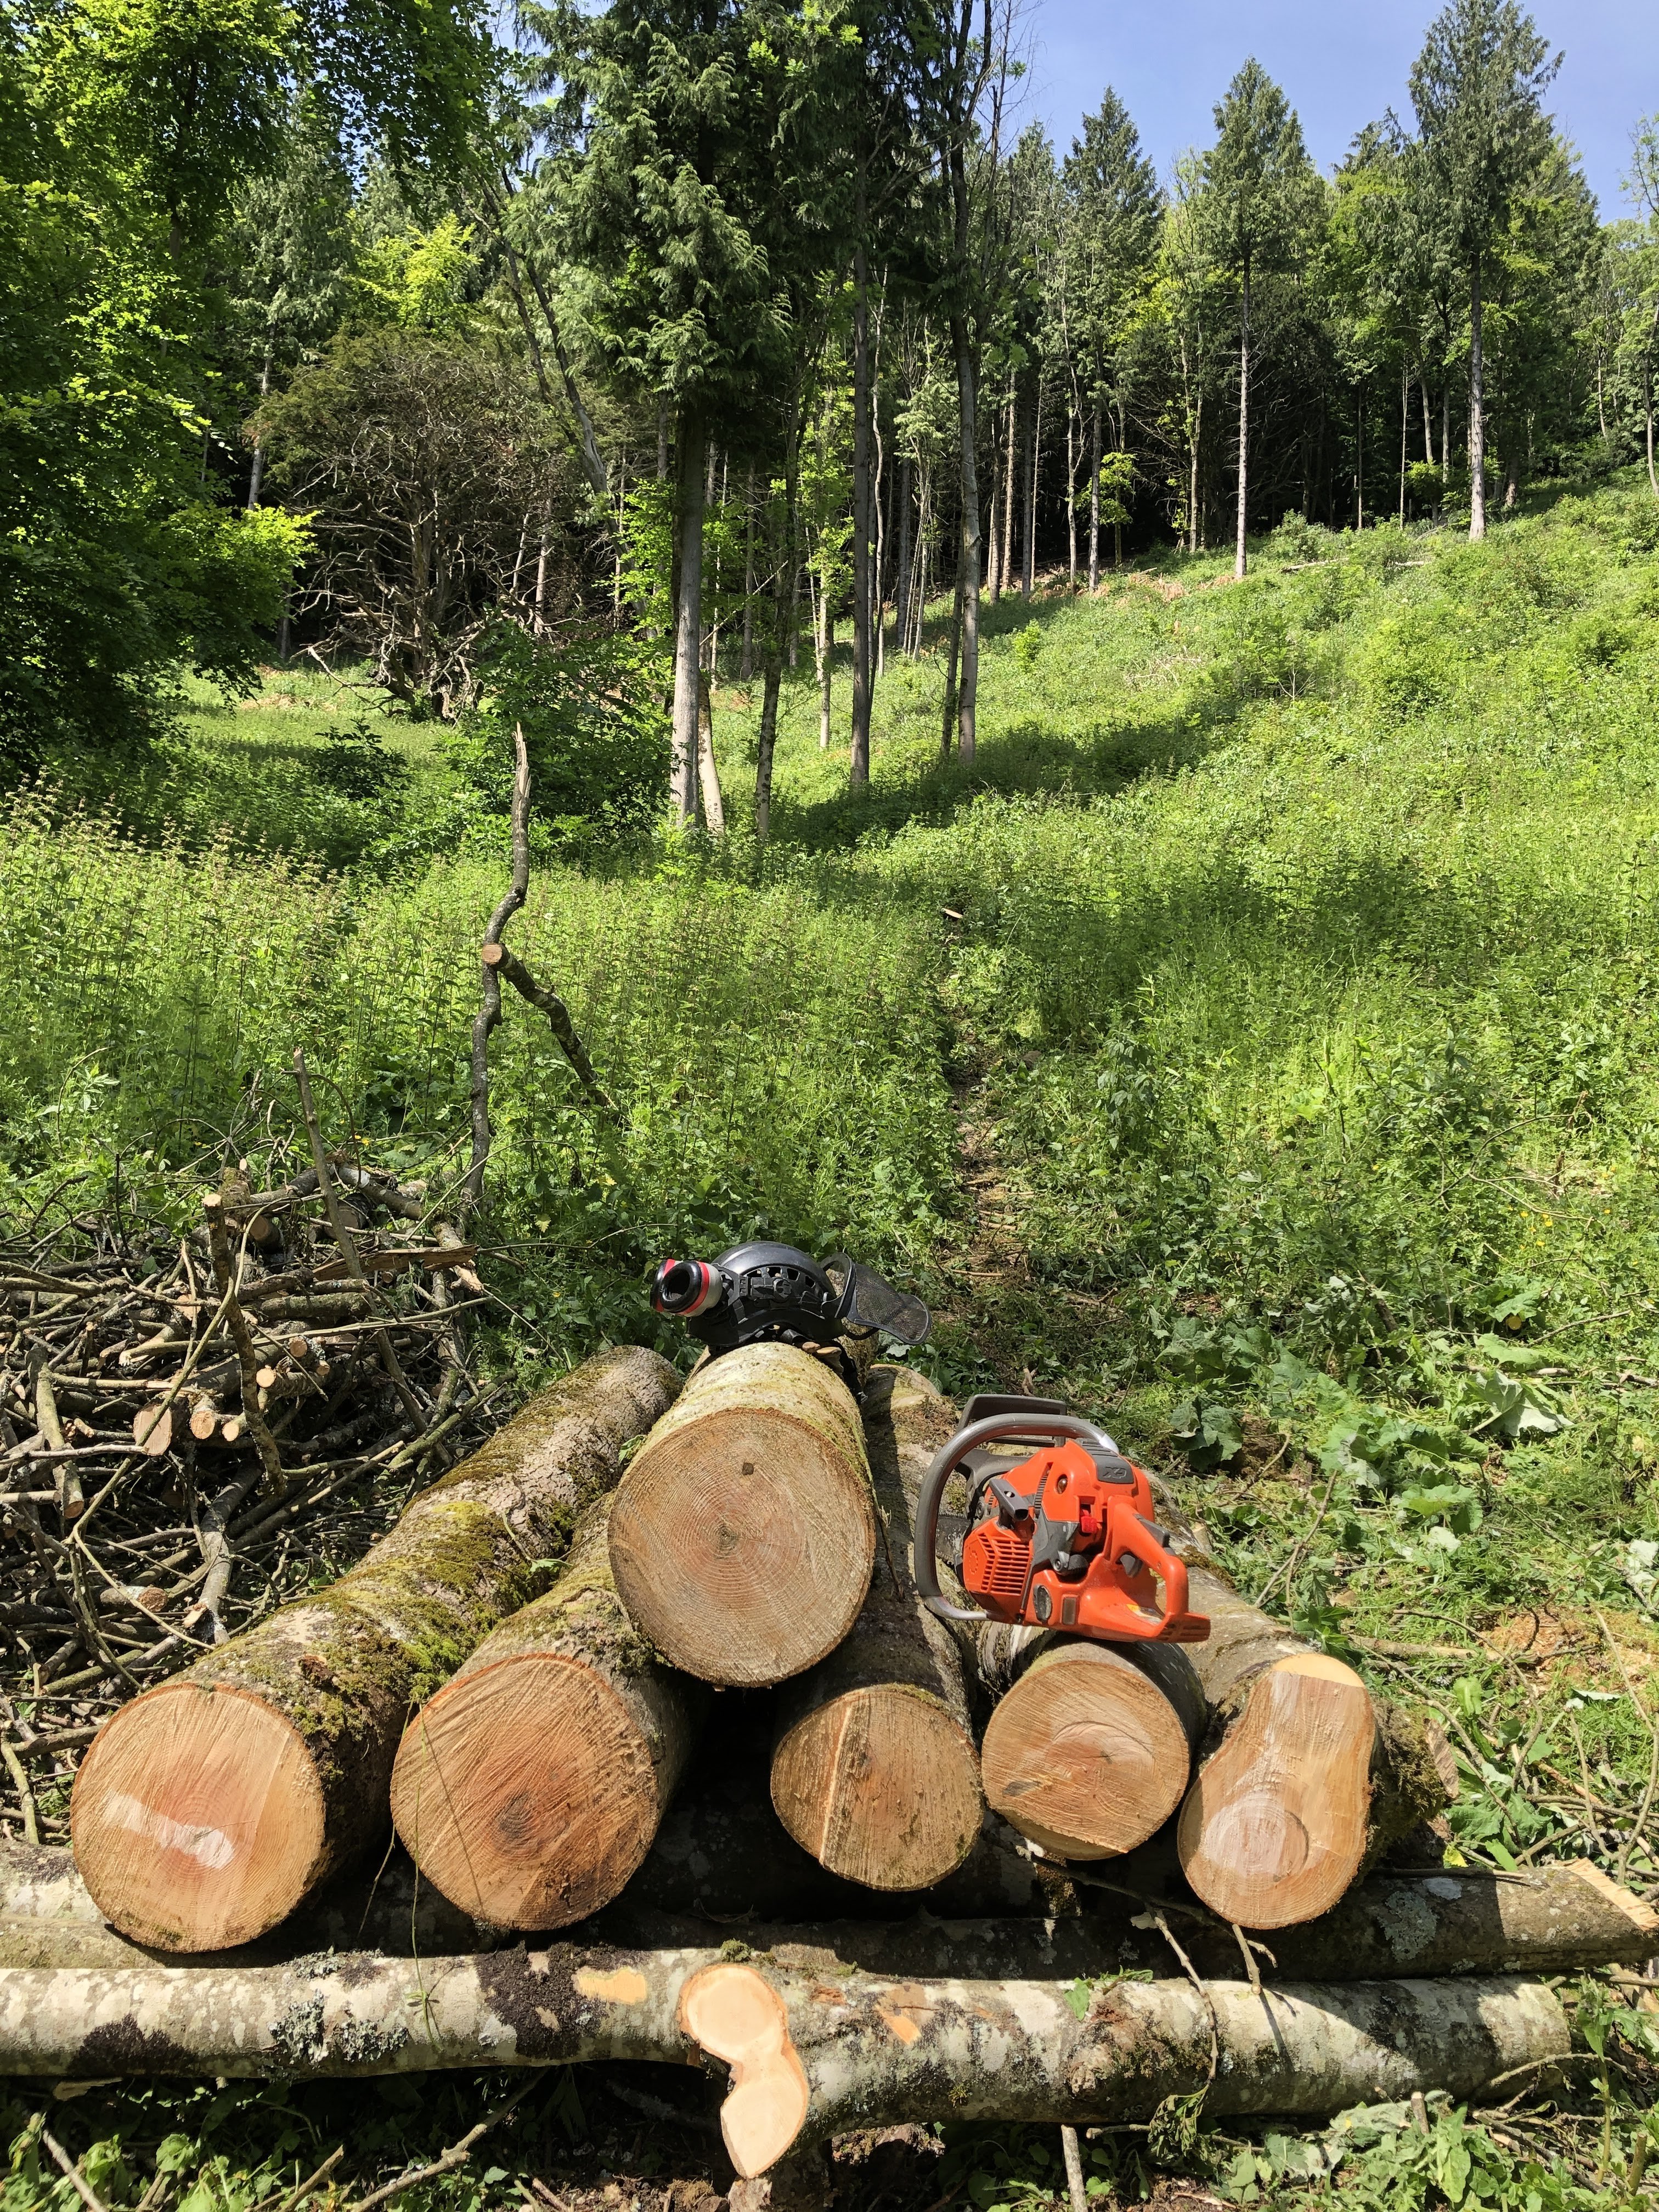 Chainsaw Maintenance and Cross-Cutting